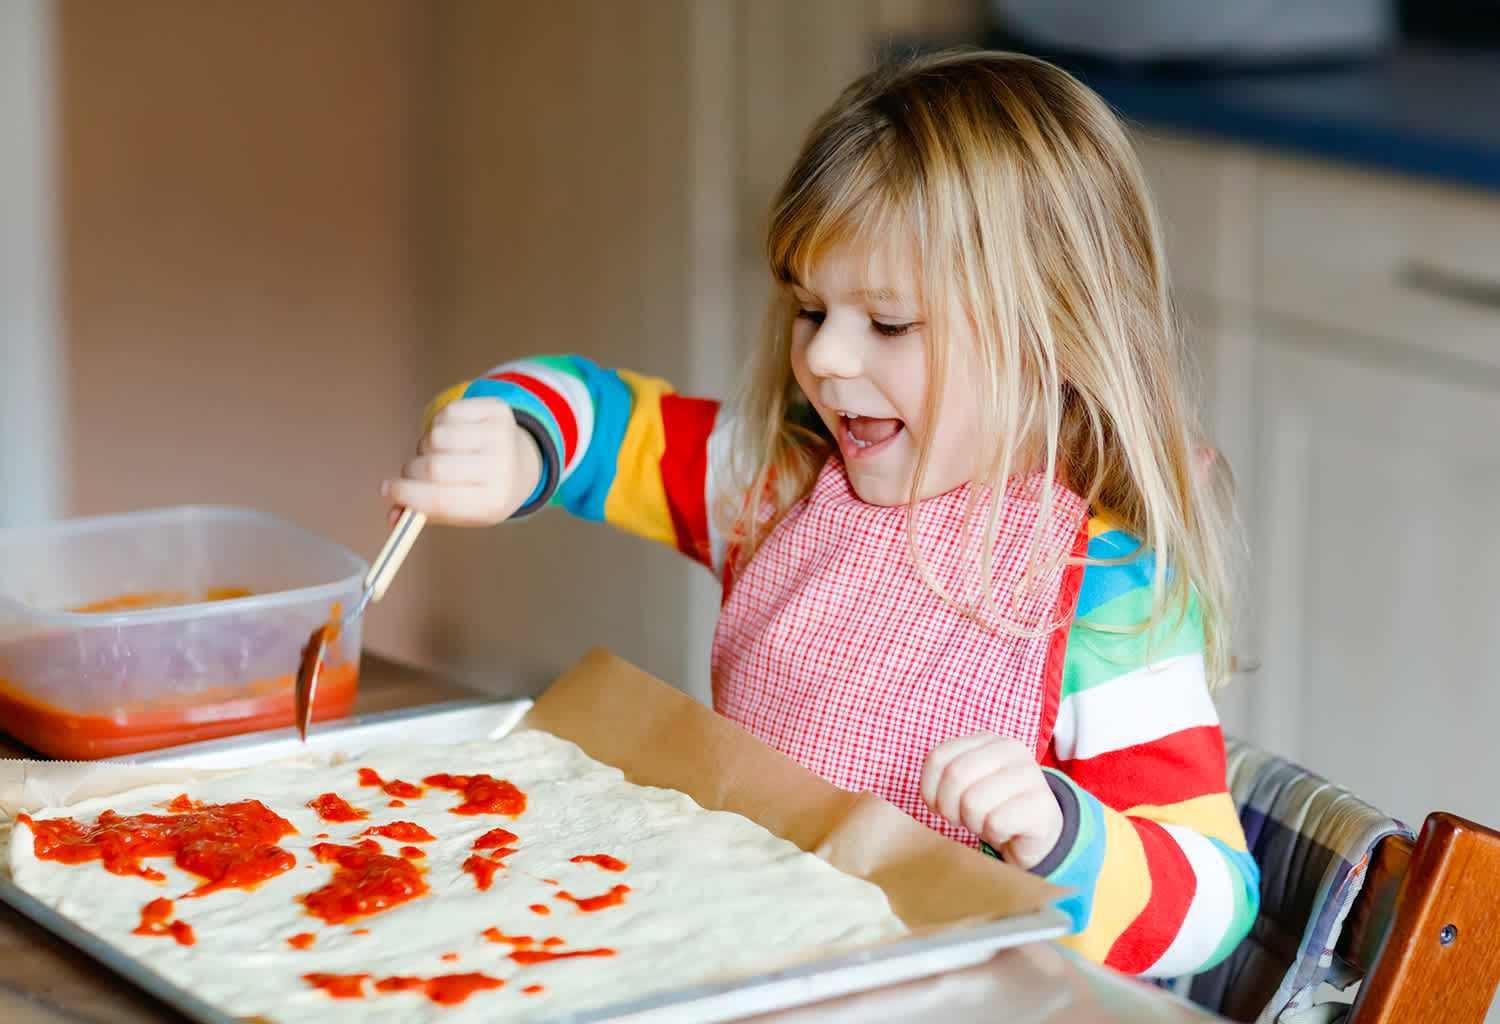 12 Cleaning Hacks Every Parent Should Know - One Does Simply Cook!